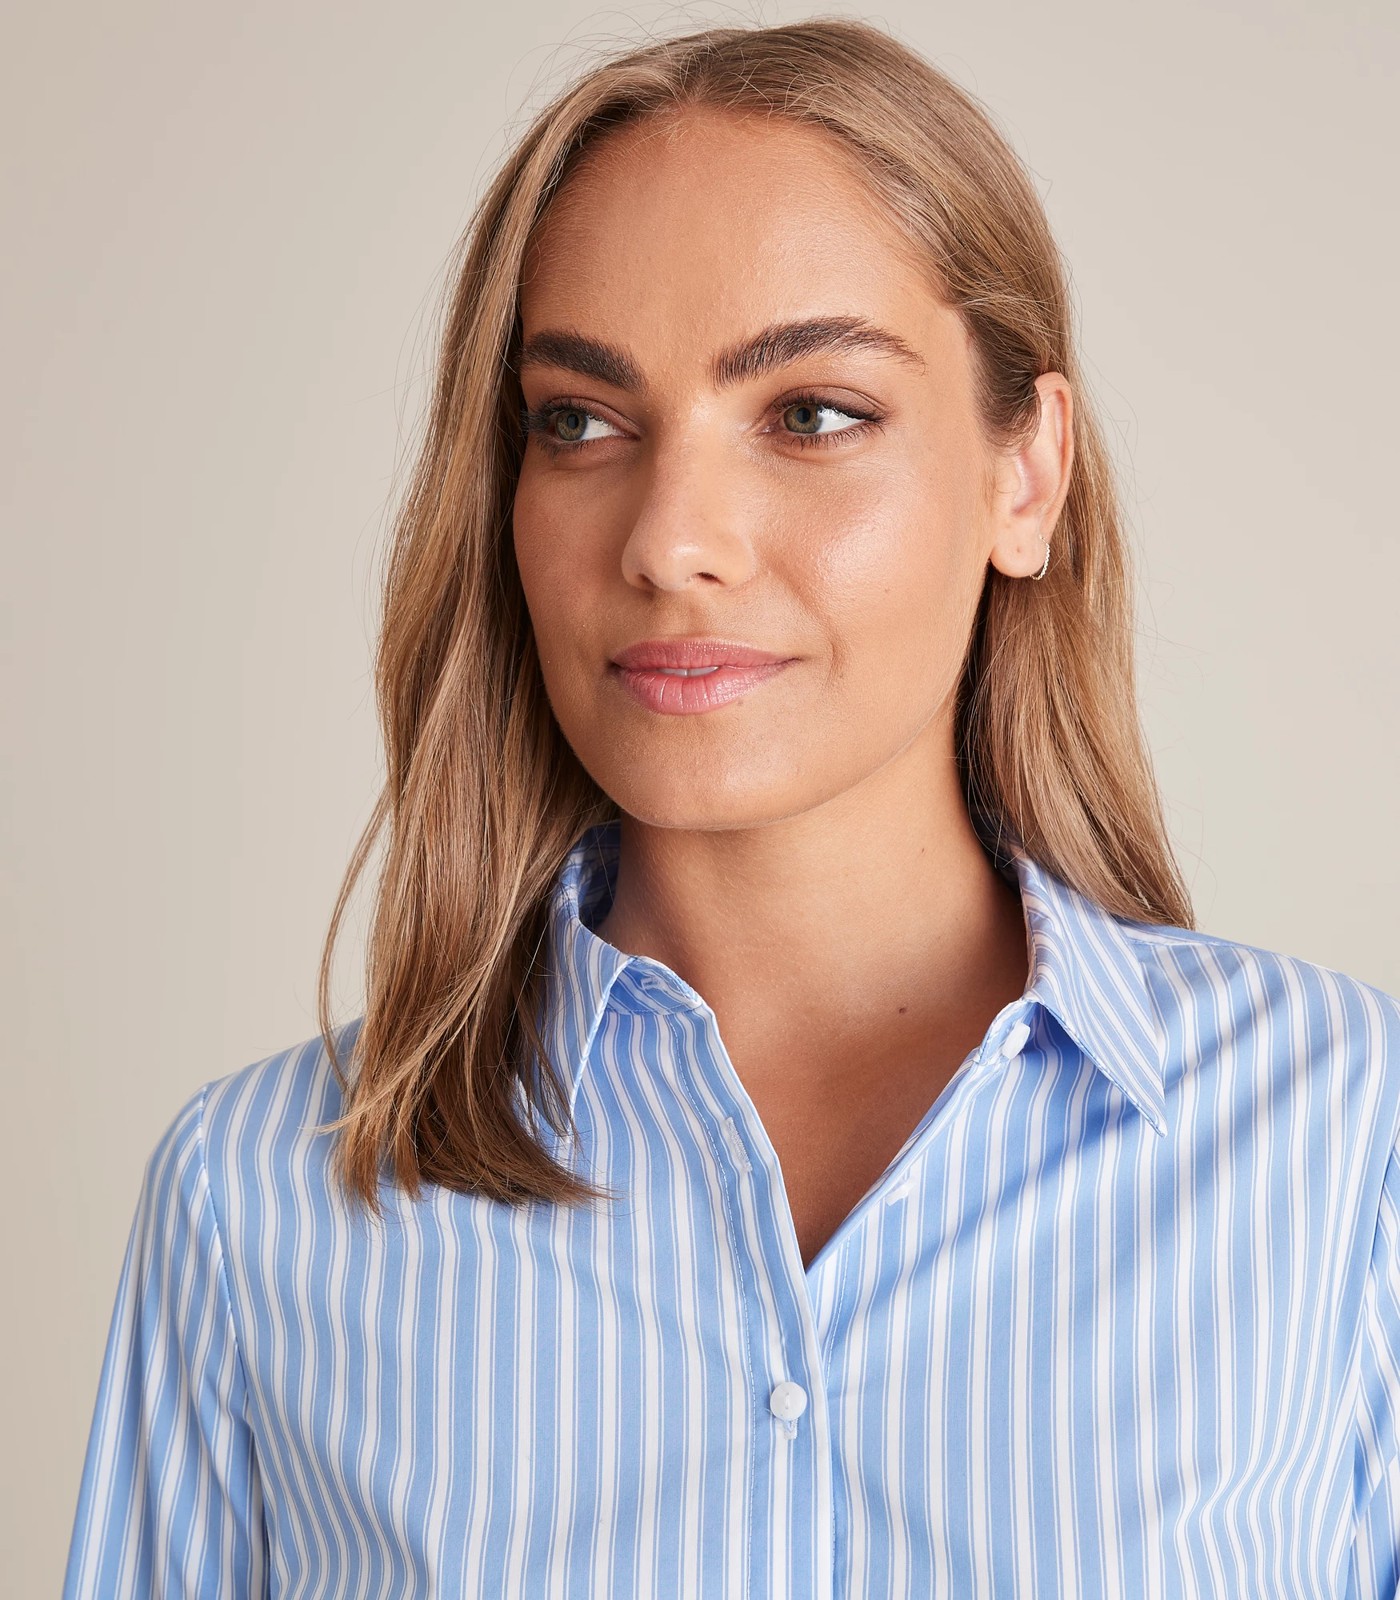 Preview Fitted Shirt | Target Australia